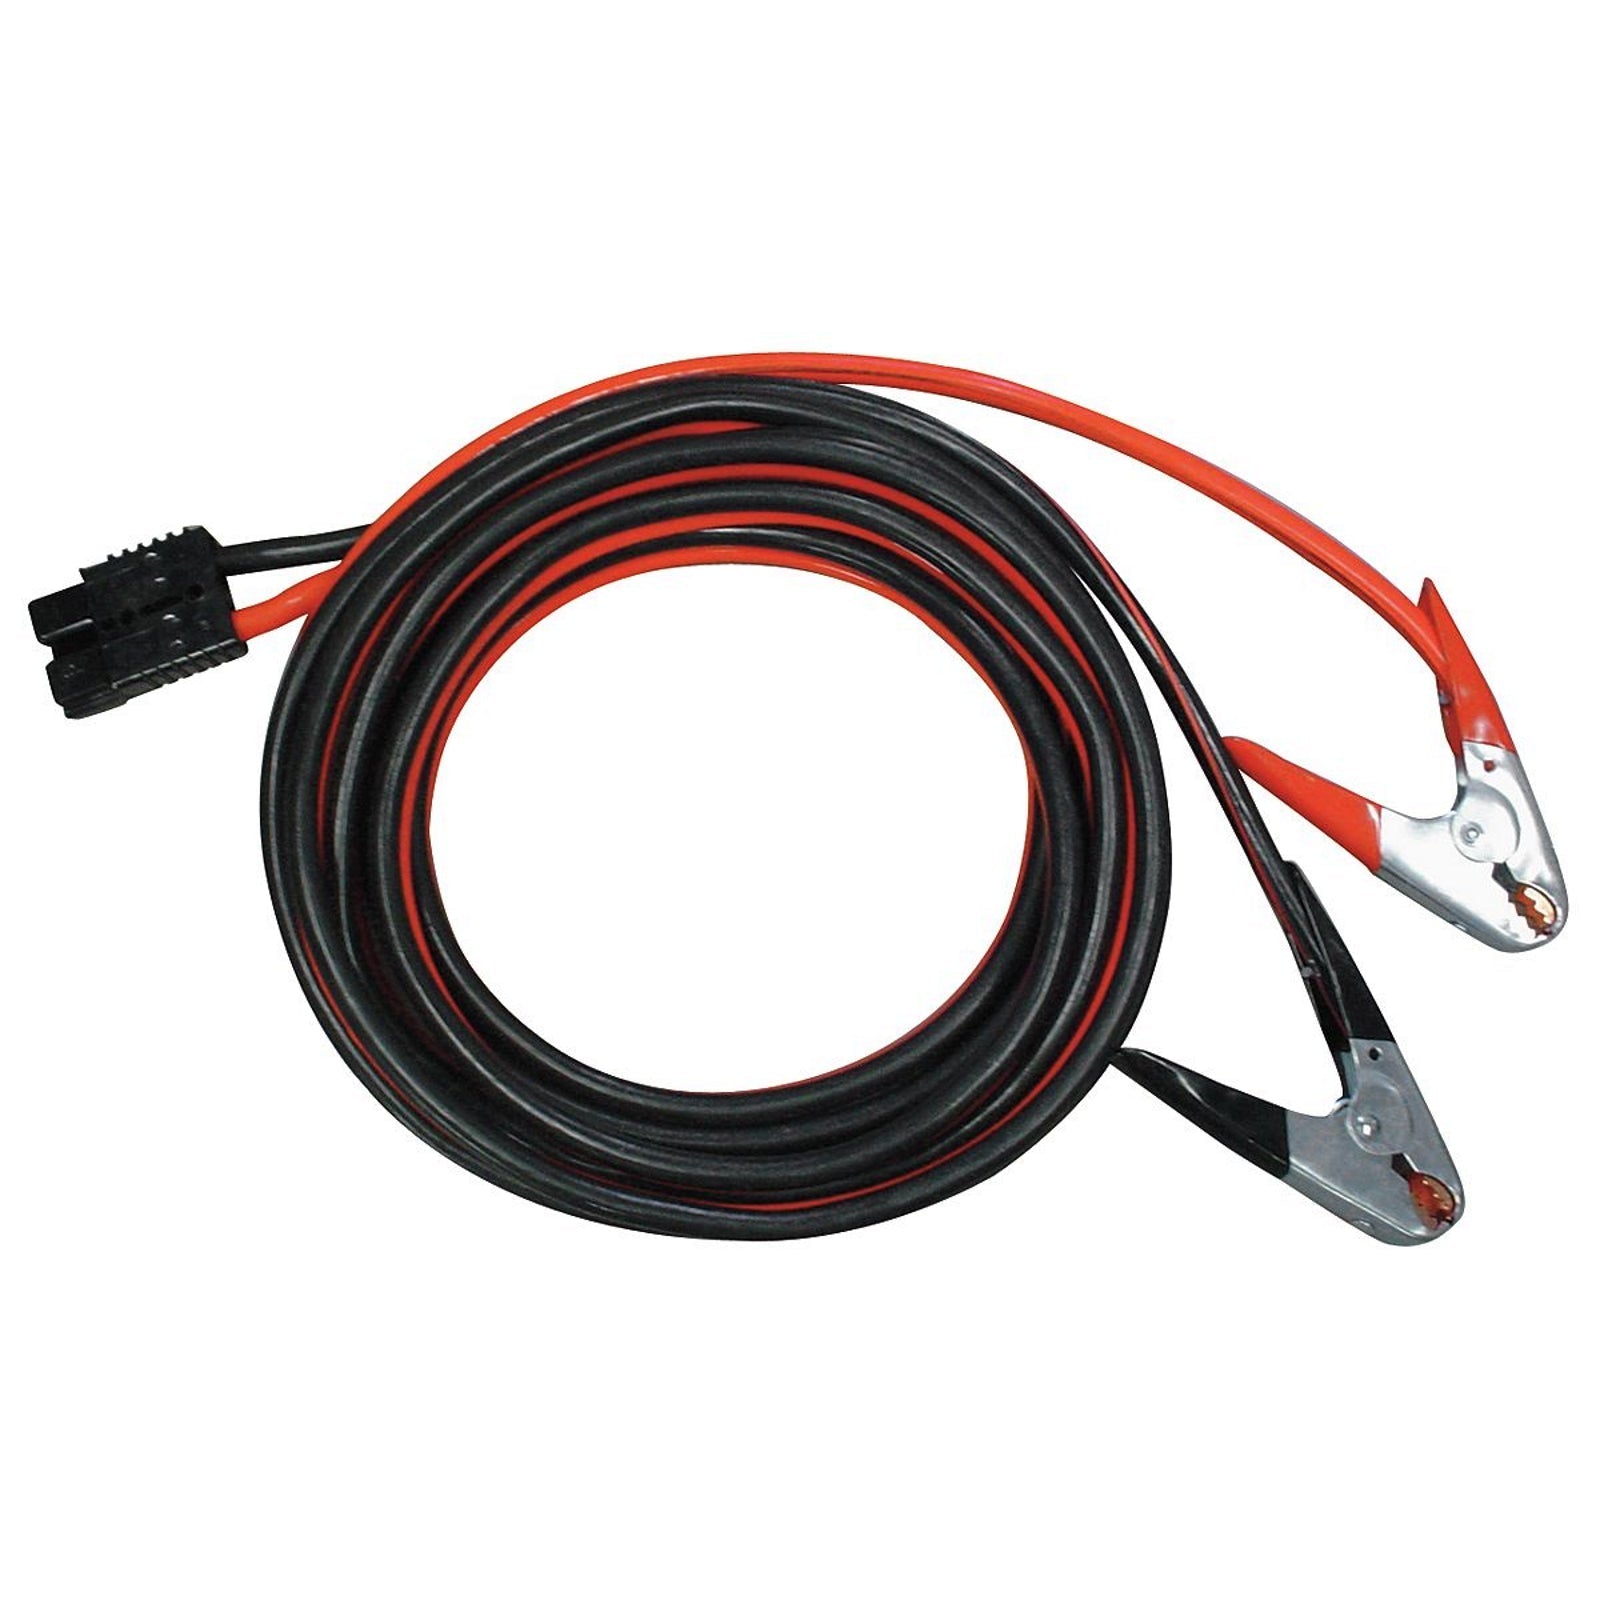 Miller 25' Battery Charge / Jump Cables w/Plug (300422)